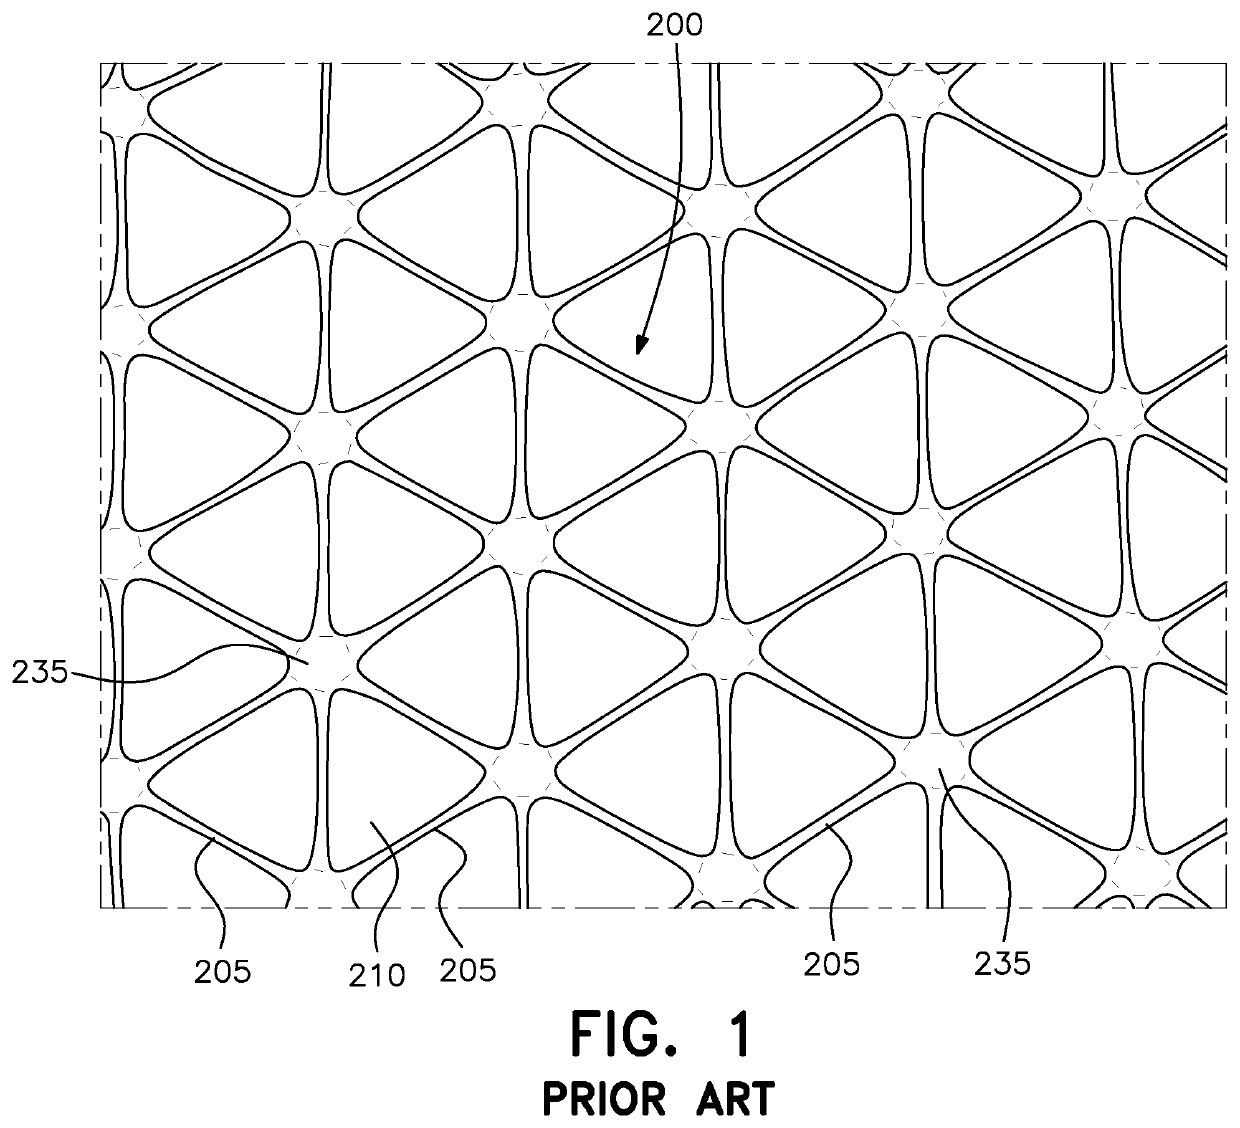 Multi-axial integral geogrid and methods of making and using same